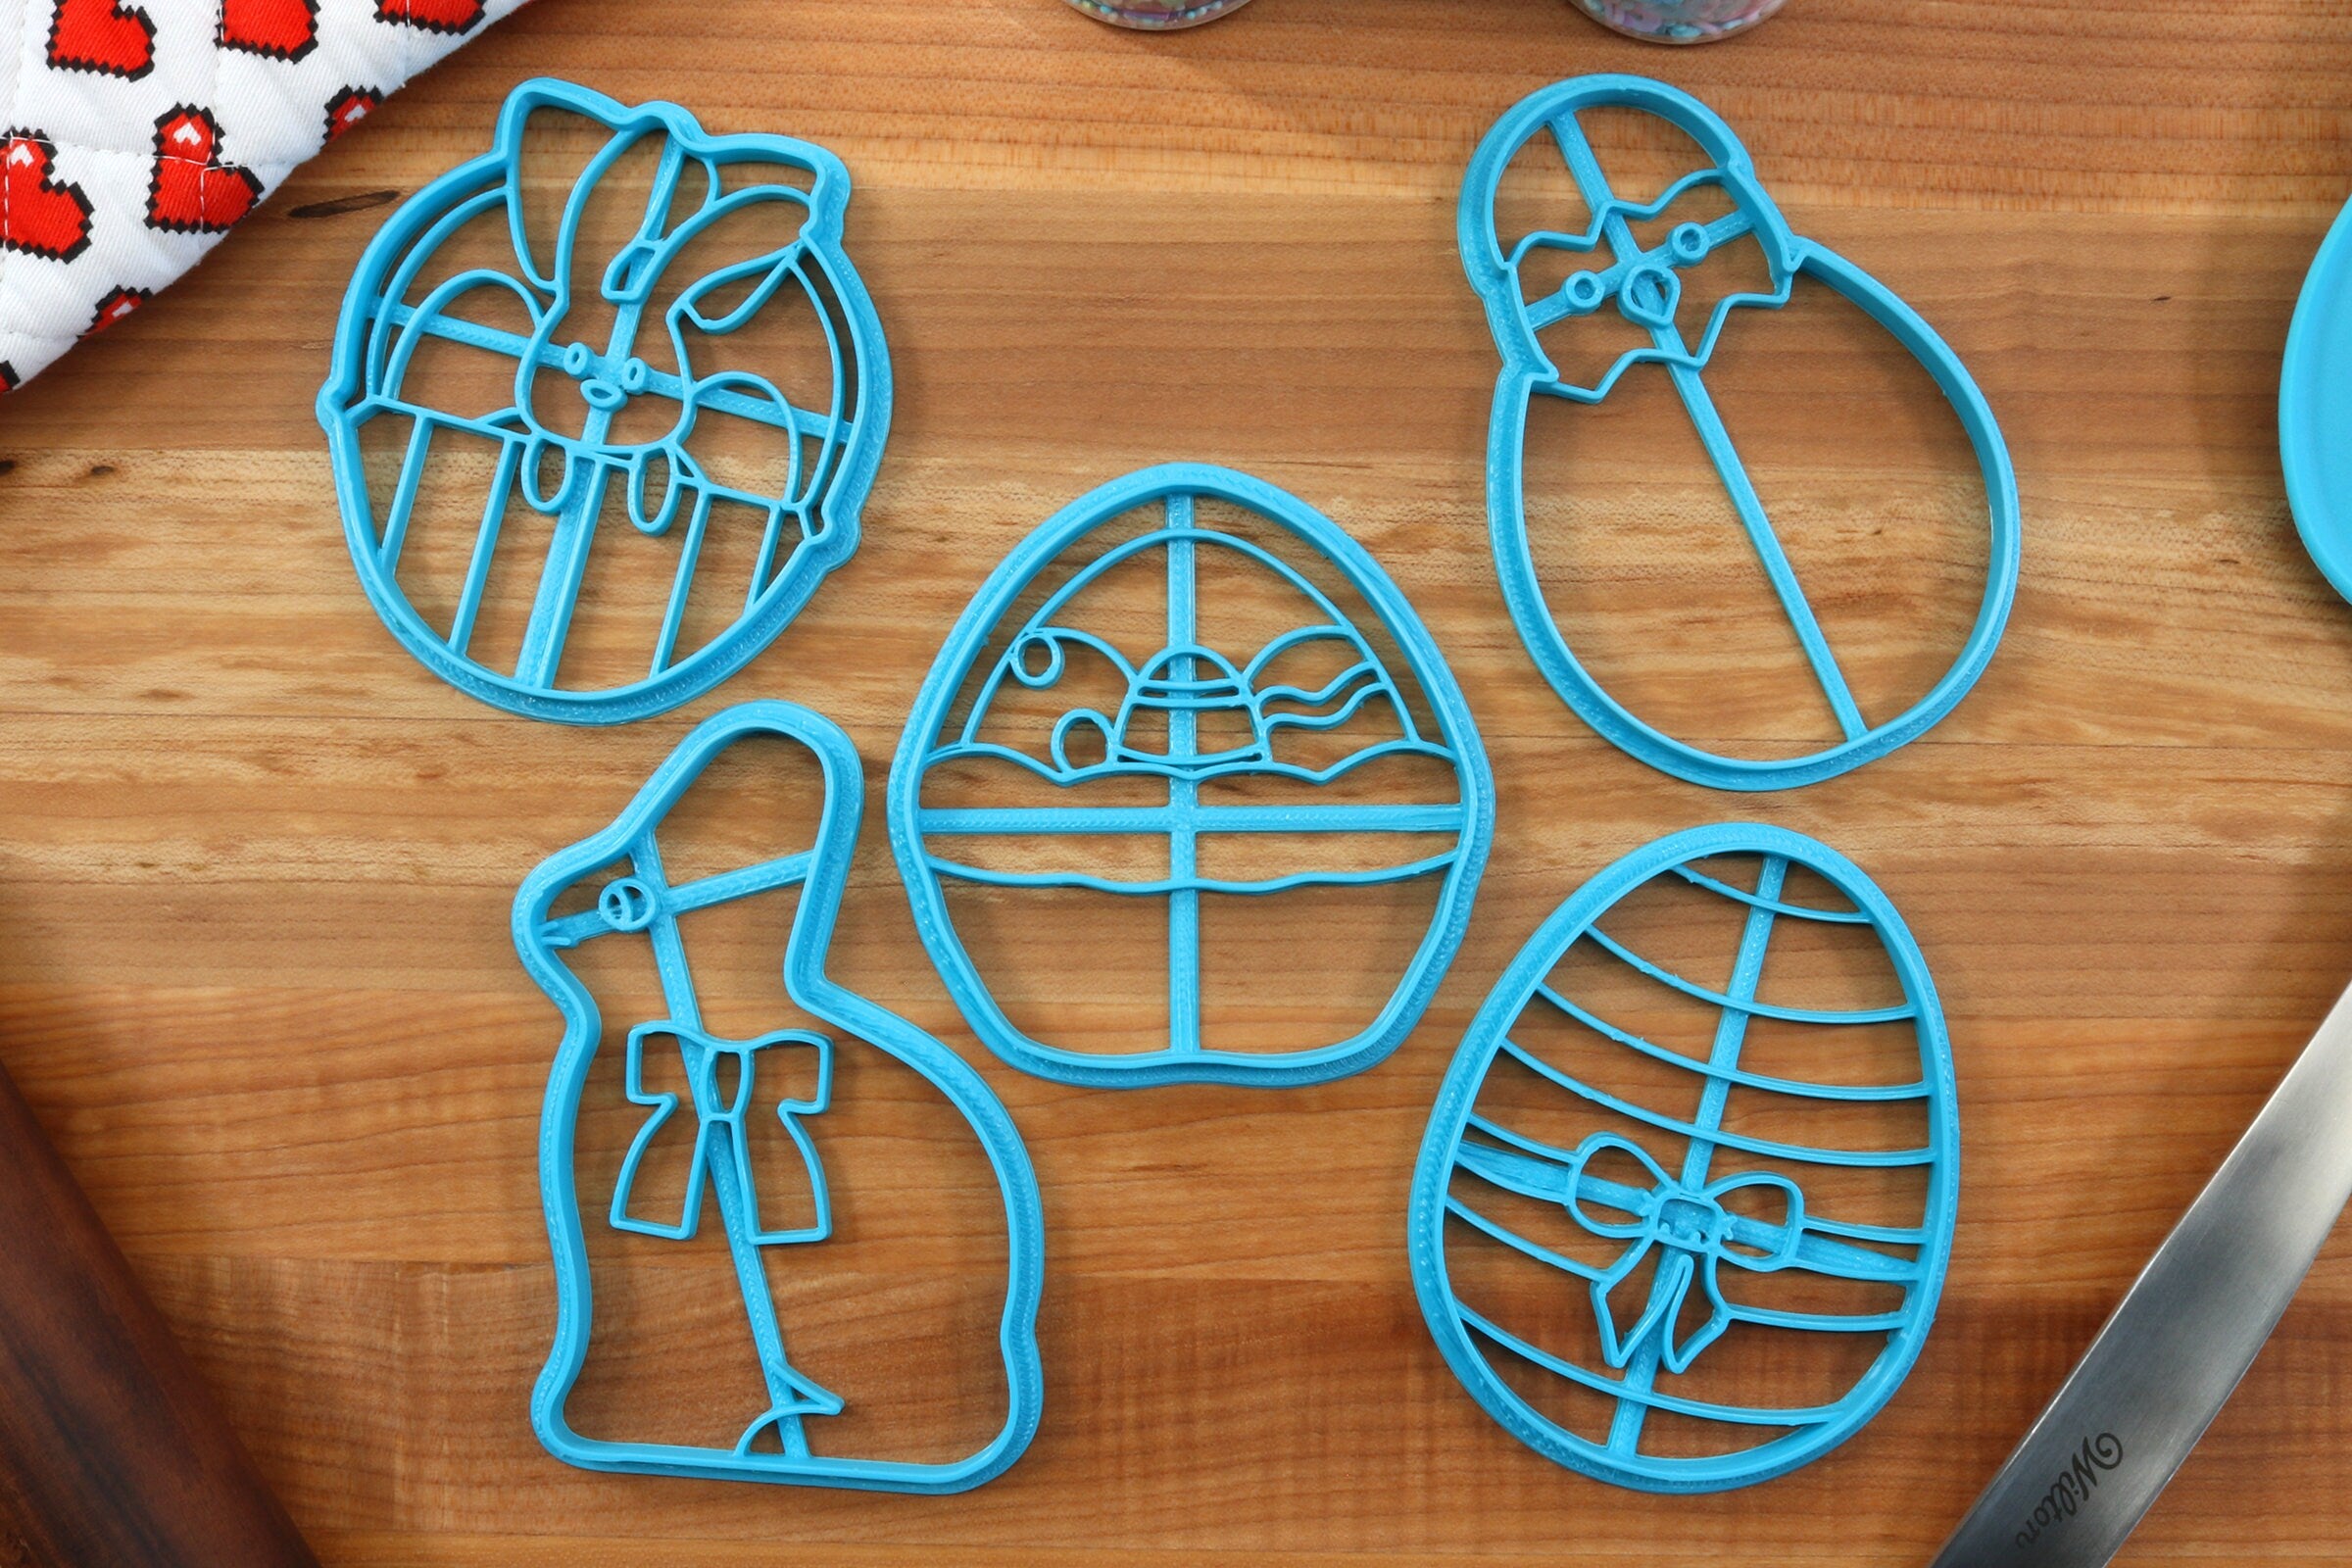 Myriad FONT Cookie Cutters - Fondant Letters, Letters for Cake decorating